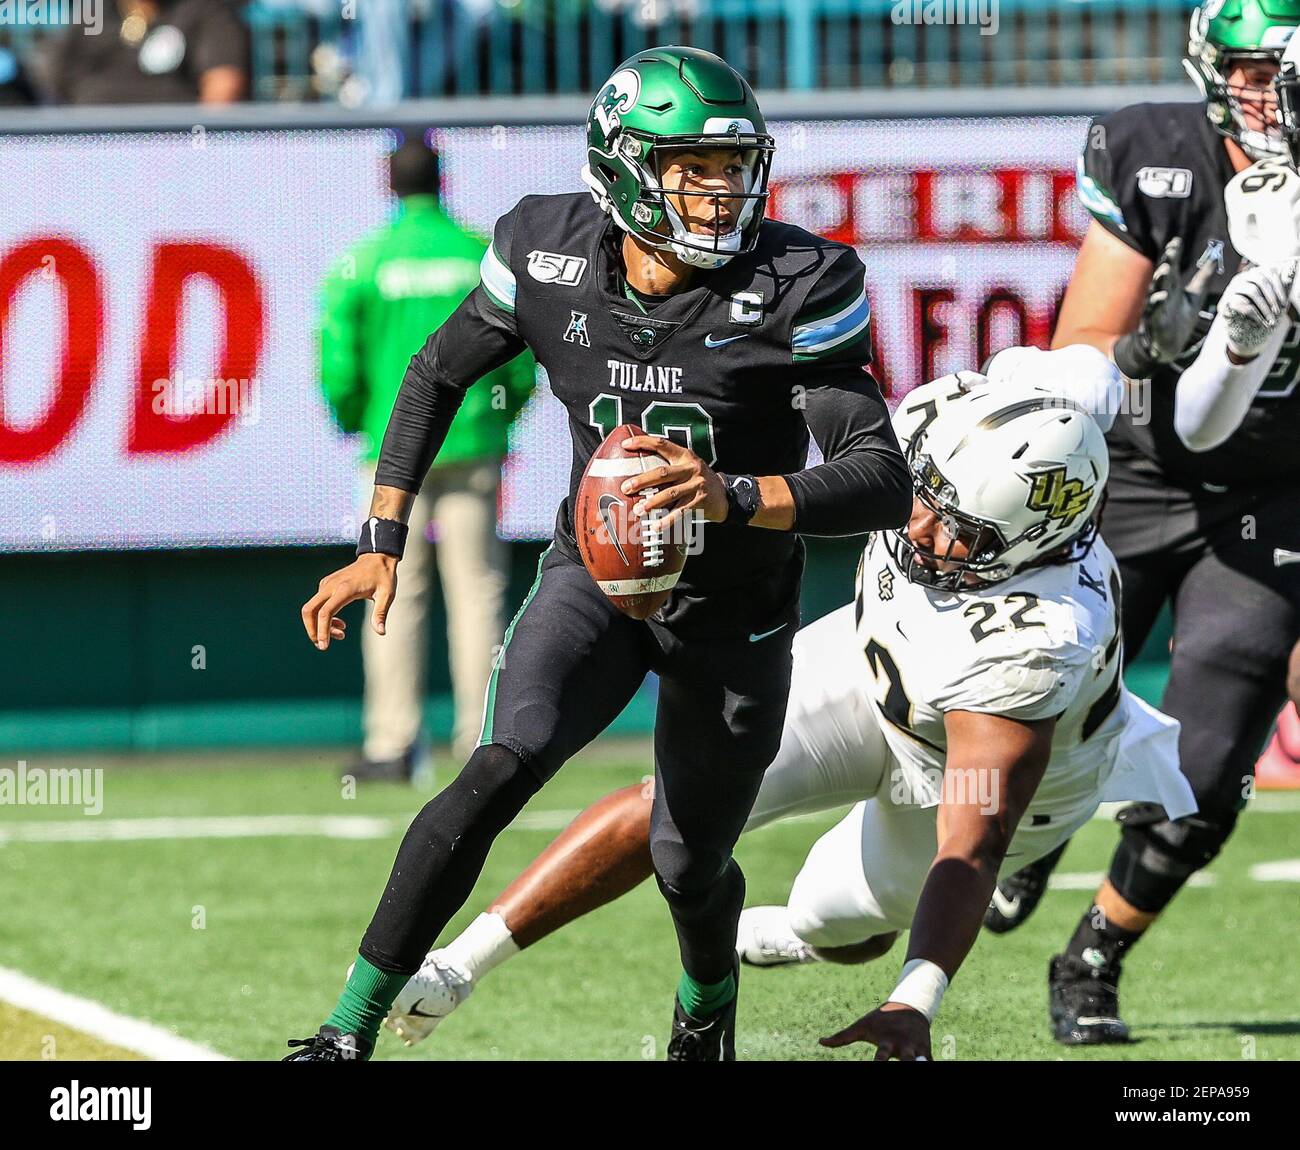 November 23, 2019: Tulane QB Justin McMillan #12 escapes from a UCF pass rusher by leaving the pocket during the NCAA football game between the Tulane Green Wave and the UCF Knights at Yulman Stadium in New Orleans, LA. Kyle Okita/(Photo by Kyle Okita/CSM/Sipa USA) Stock Photo